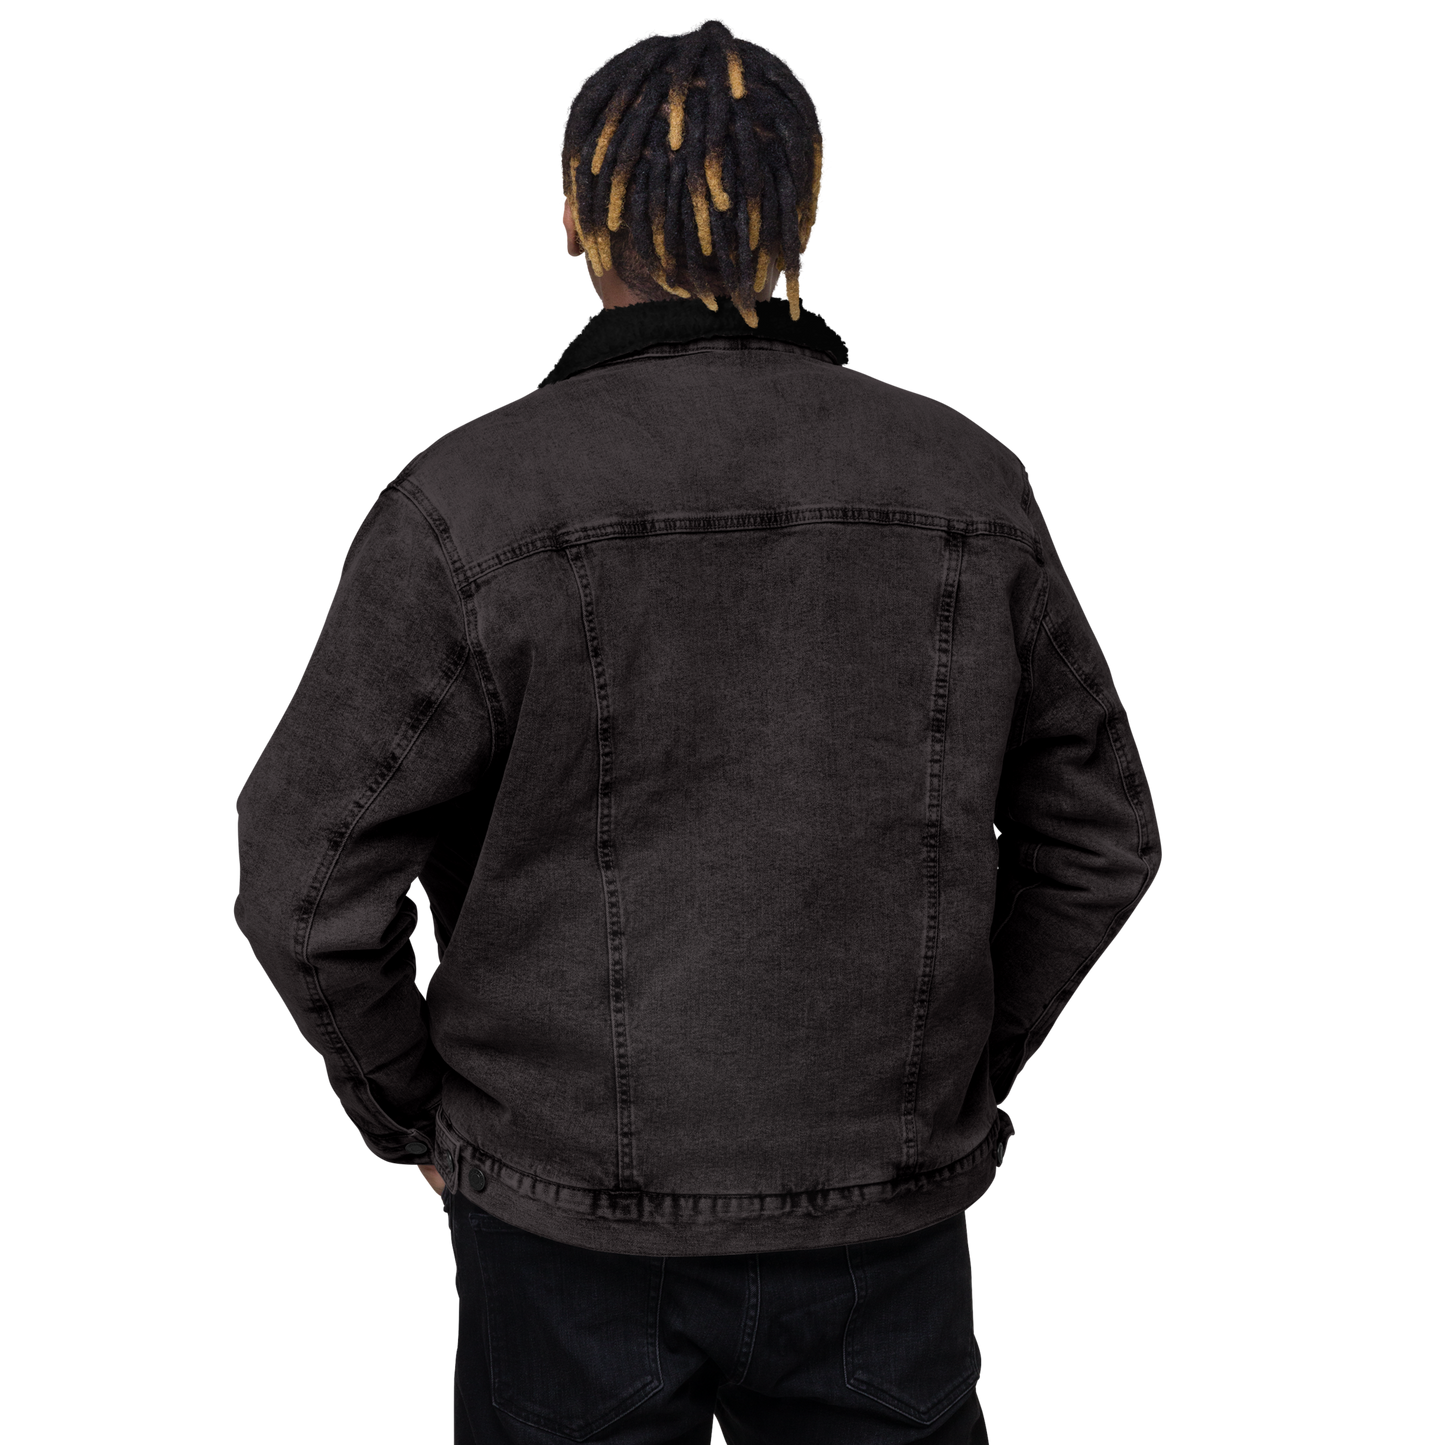 YHM Designs - YHM Hamilton Denim Sherpa Jacket - Crossed-X Design with Airport Code and Vintage Propliner - Black & White Embroidery - Image 09